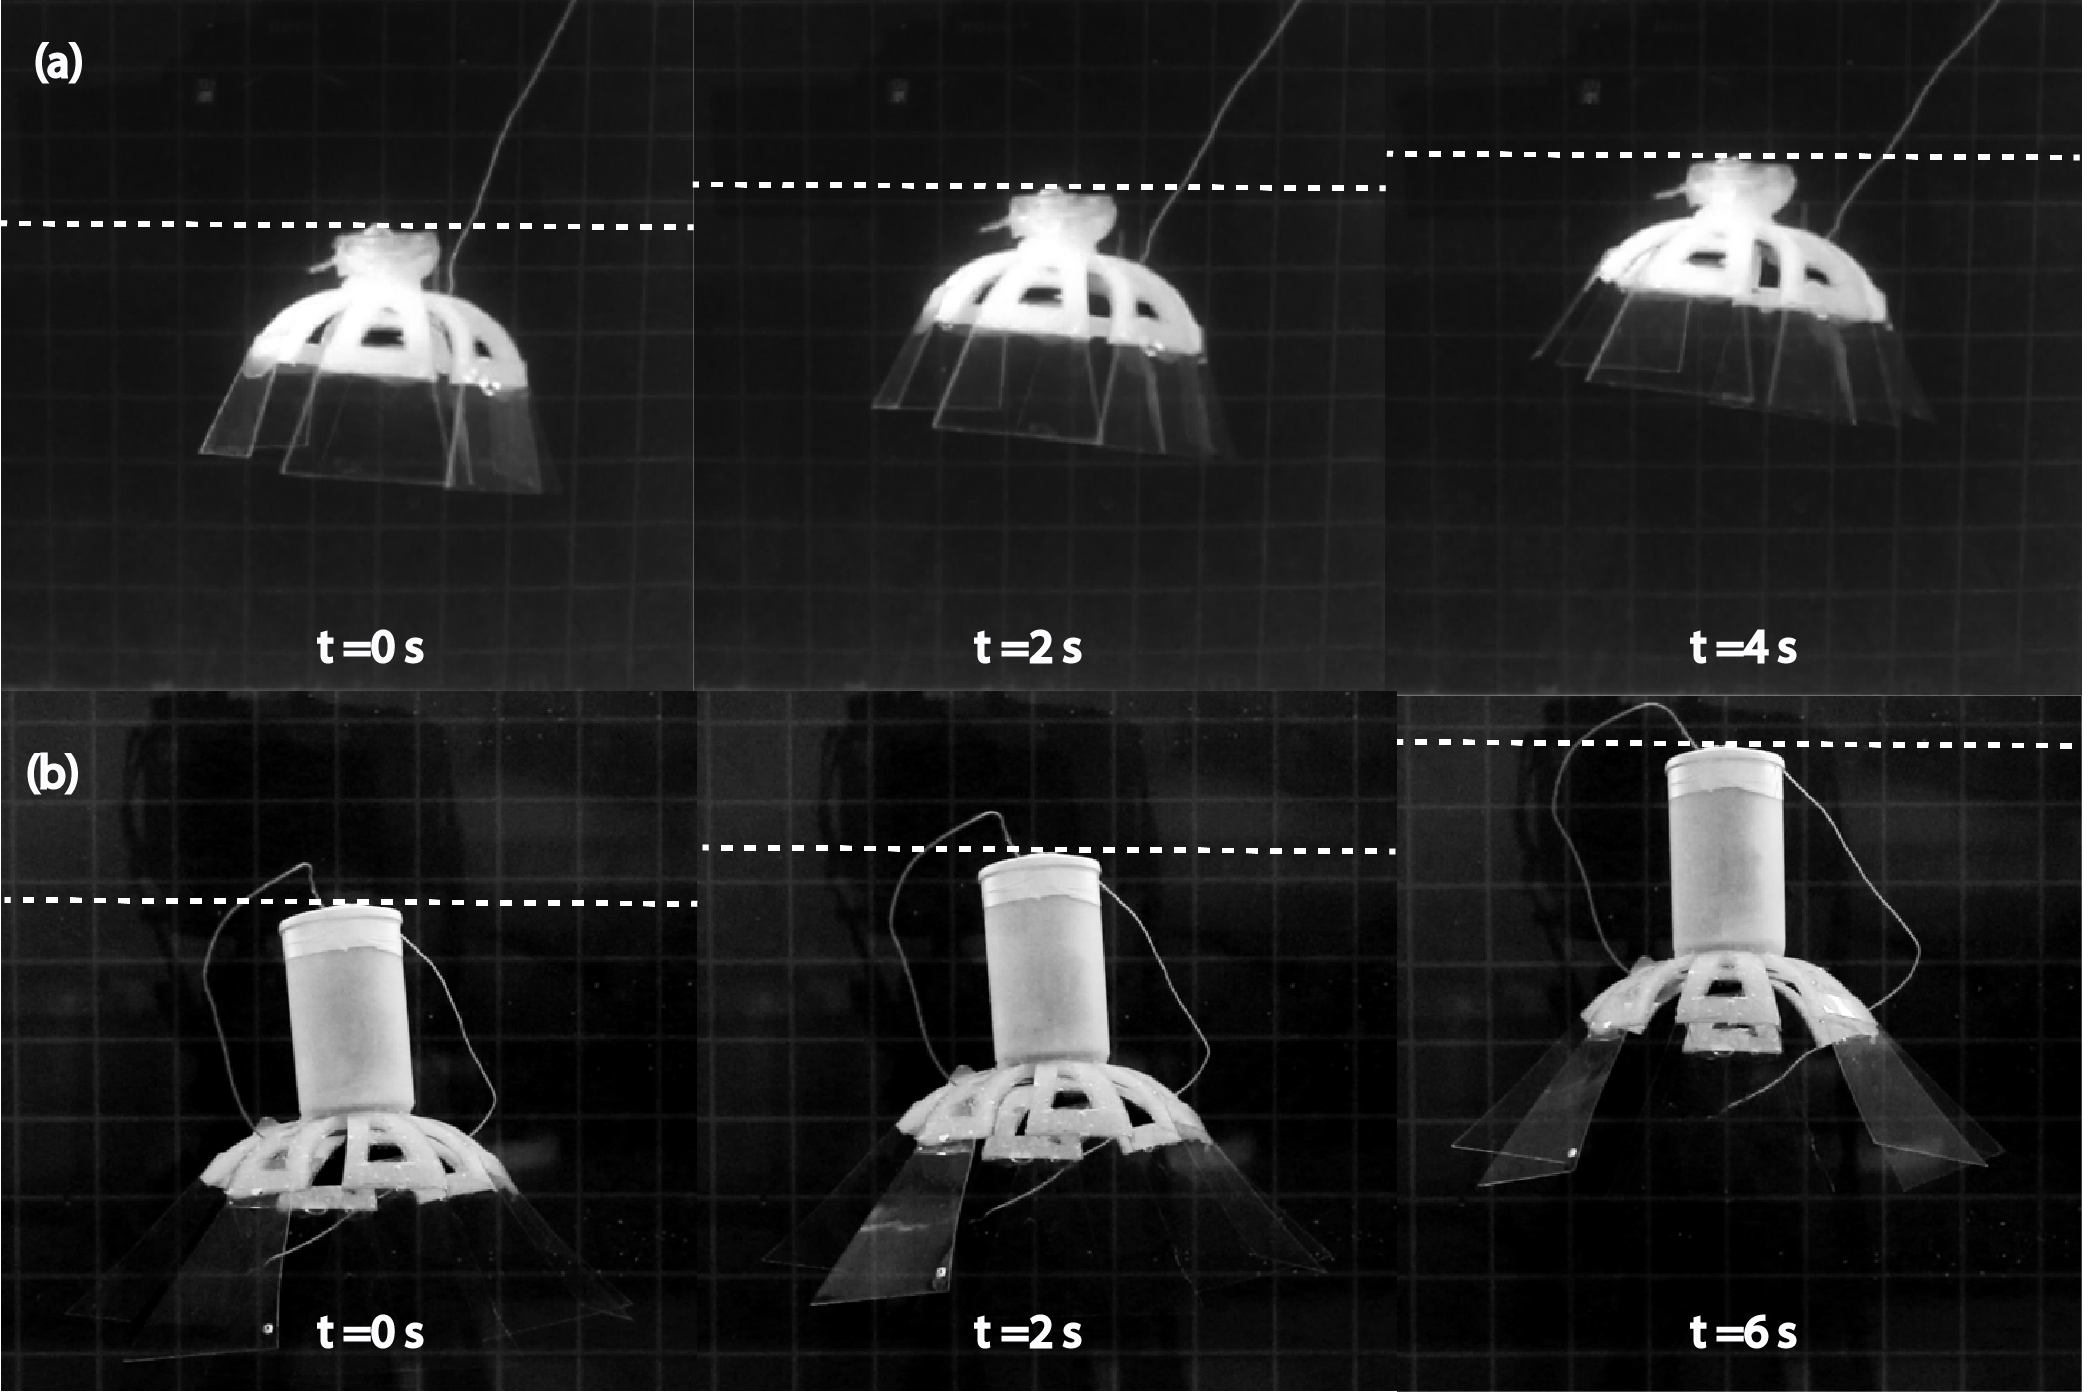 Locomotion of robotic jellyfish with and without compact power source